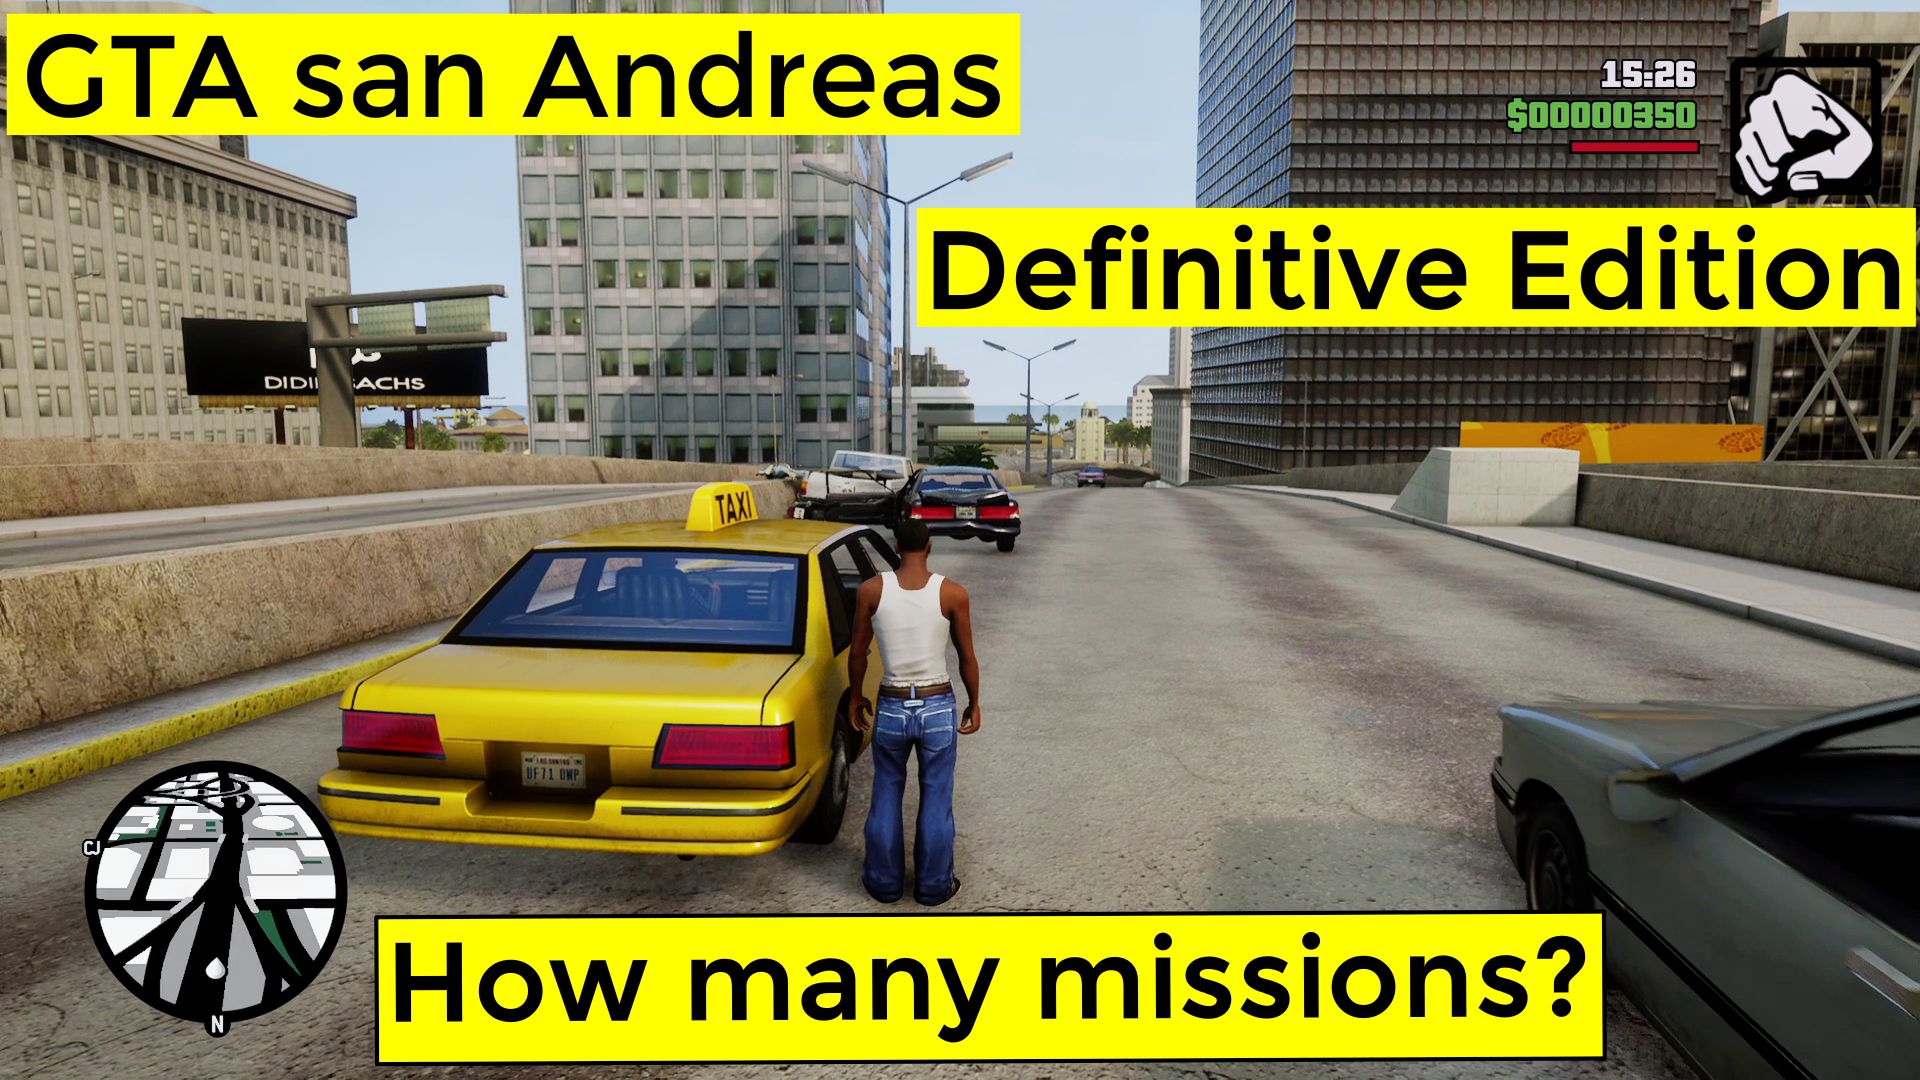 How many missions are in GTA San Andreas Definitive Edition